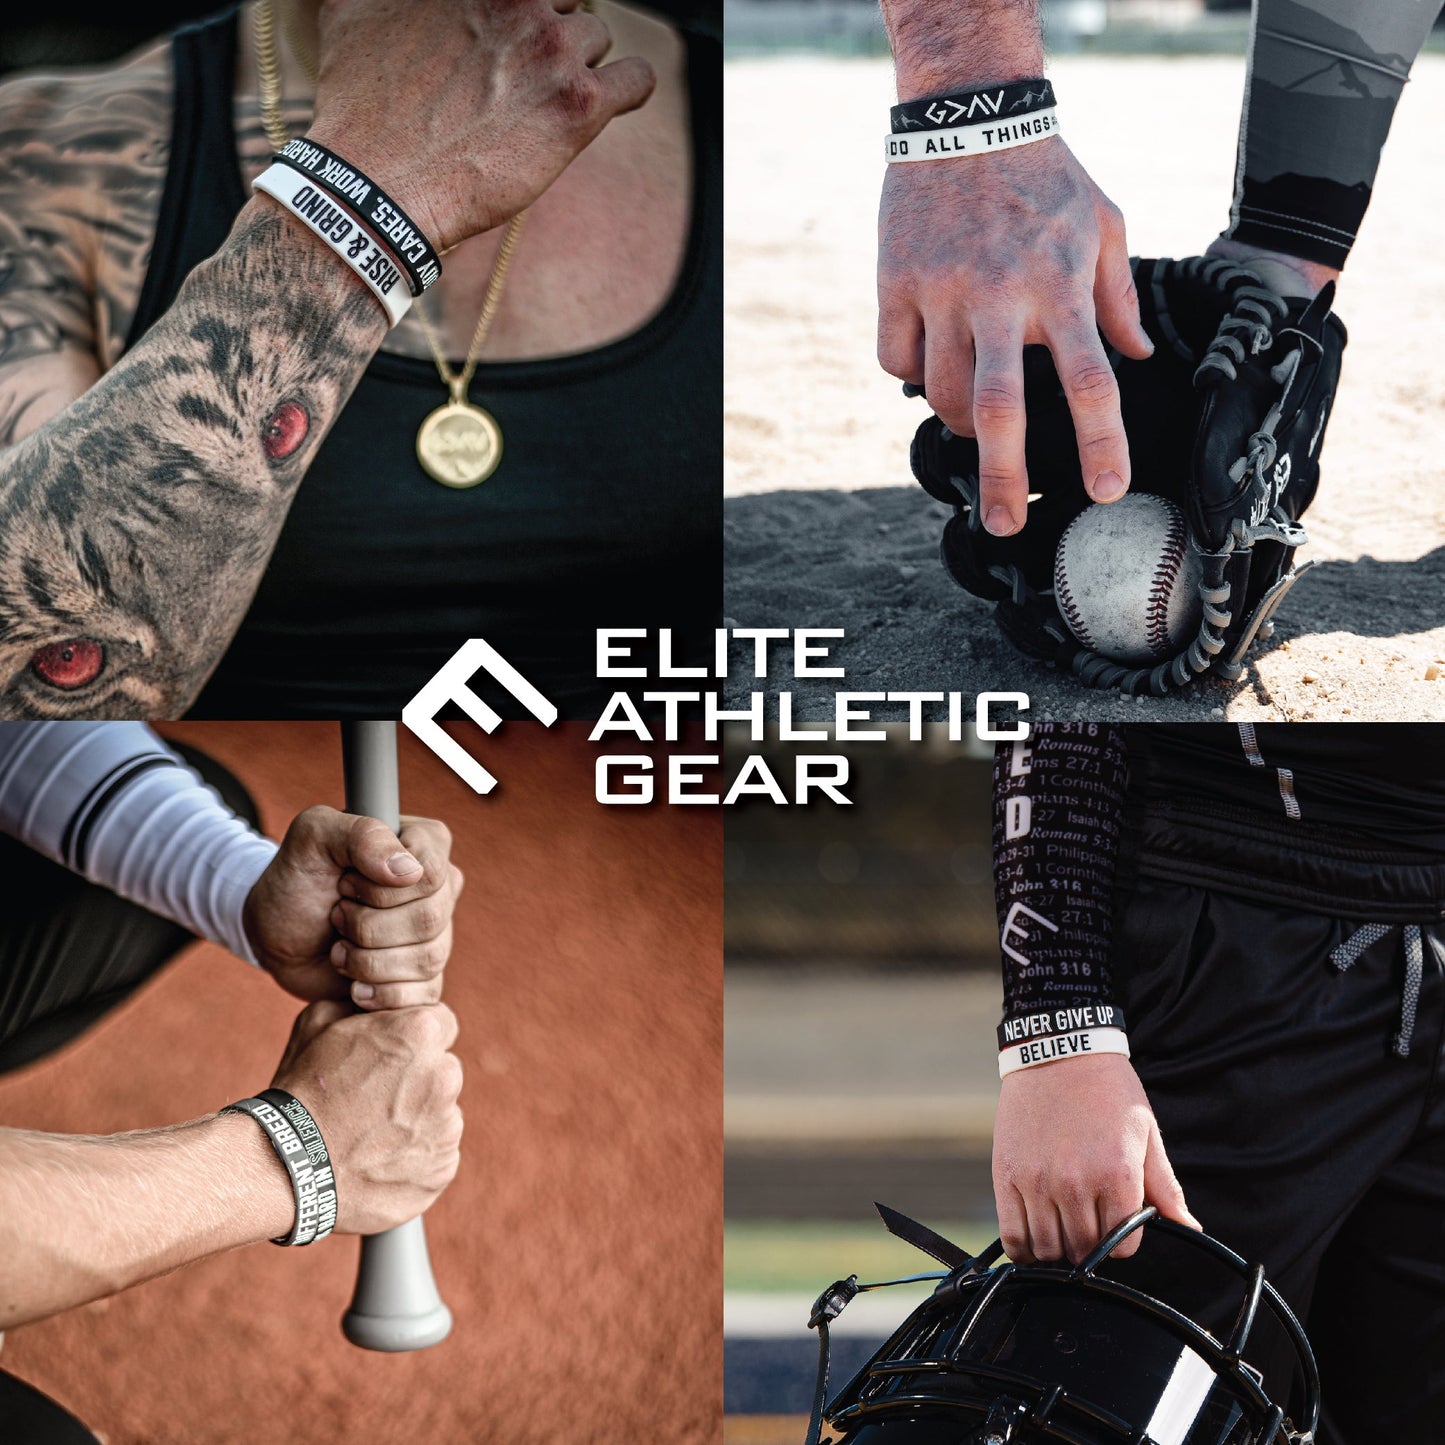 Athlete Definition Wristband - Southern Grace Creations